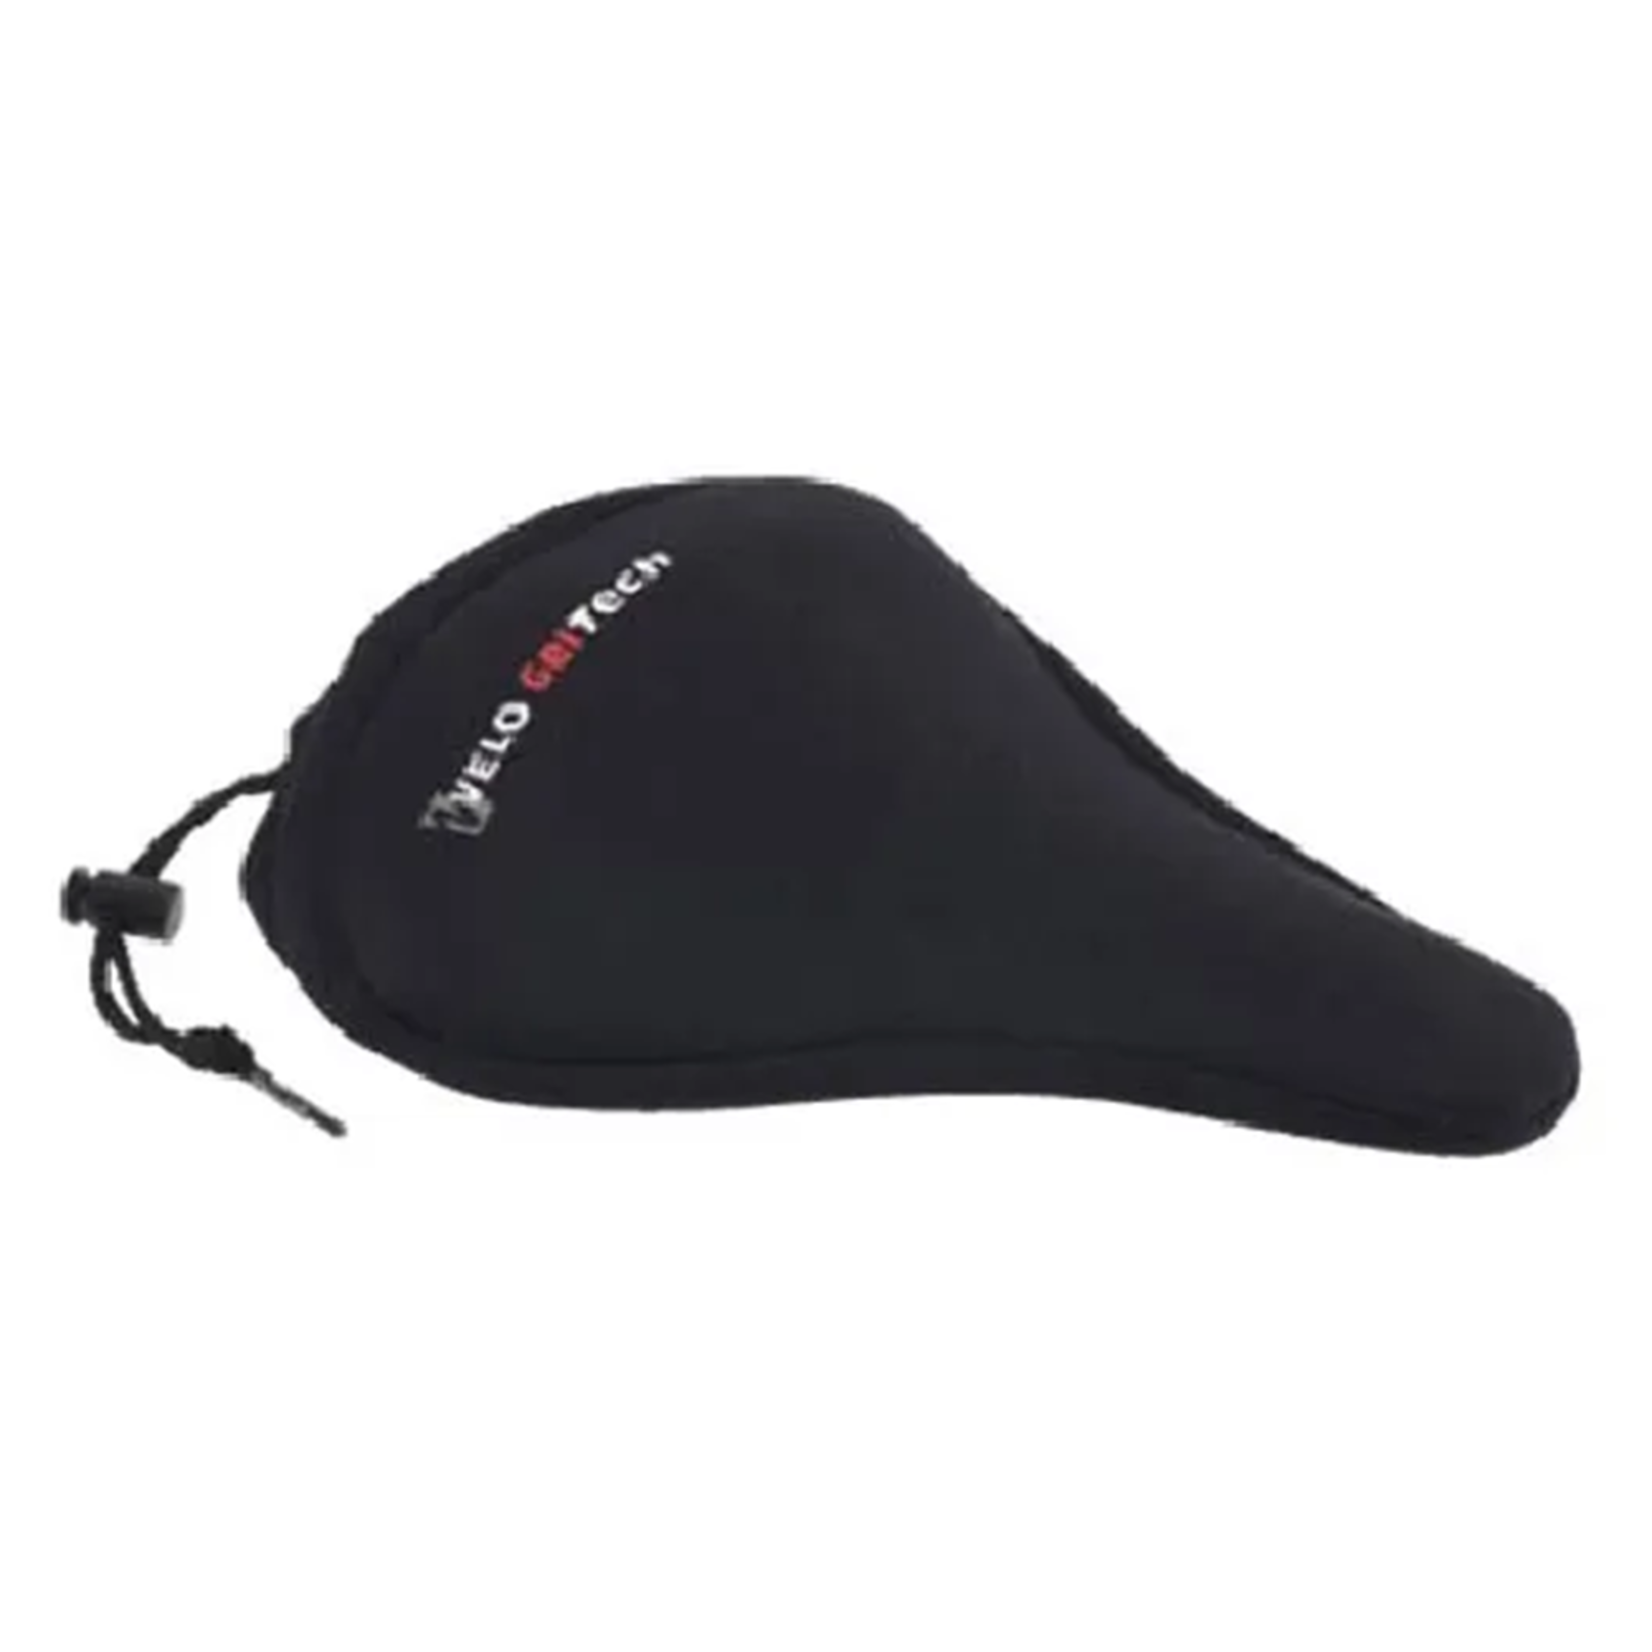 Saddle Cover - Gents Racer, Lycra with GEL